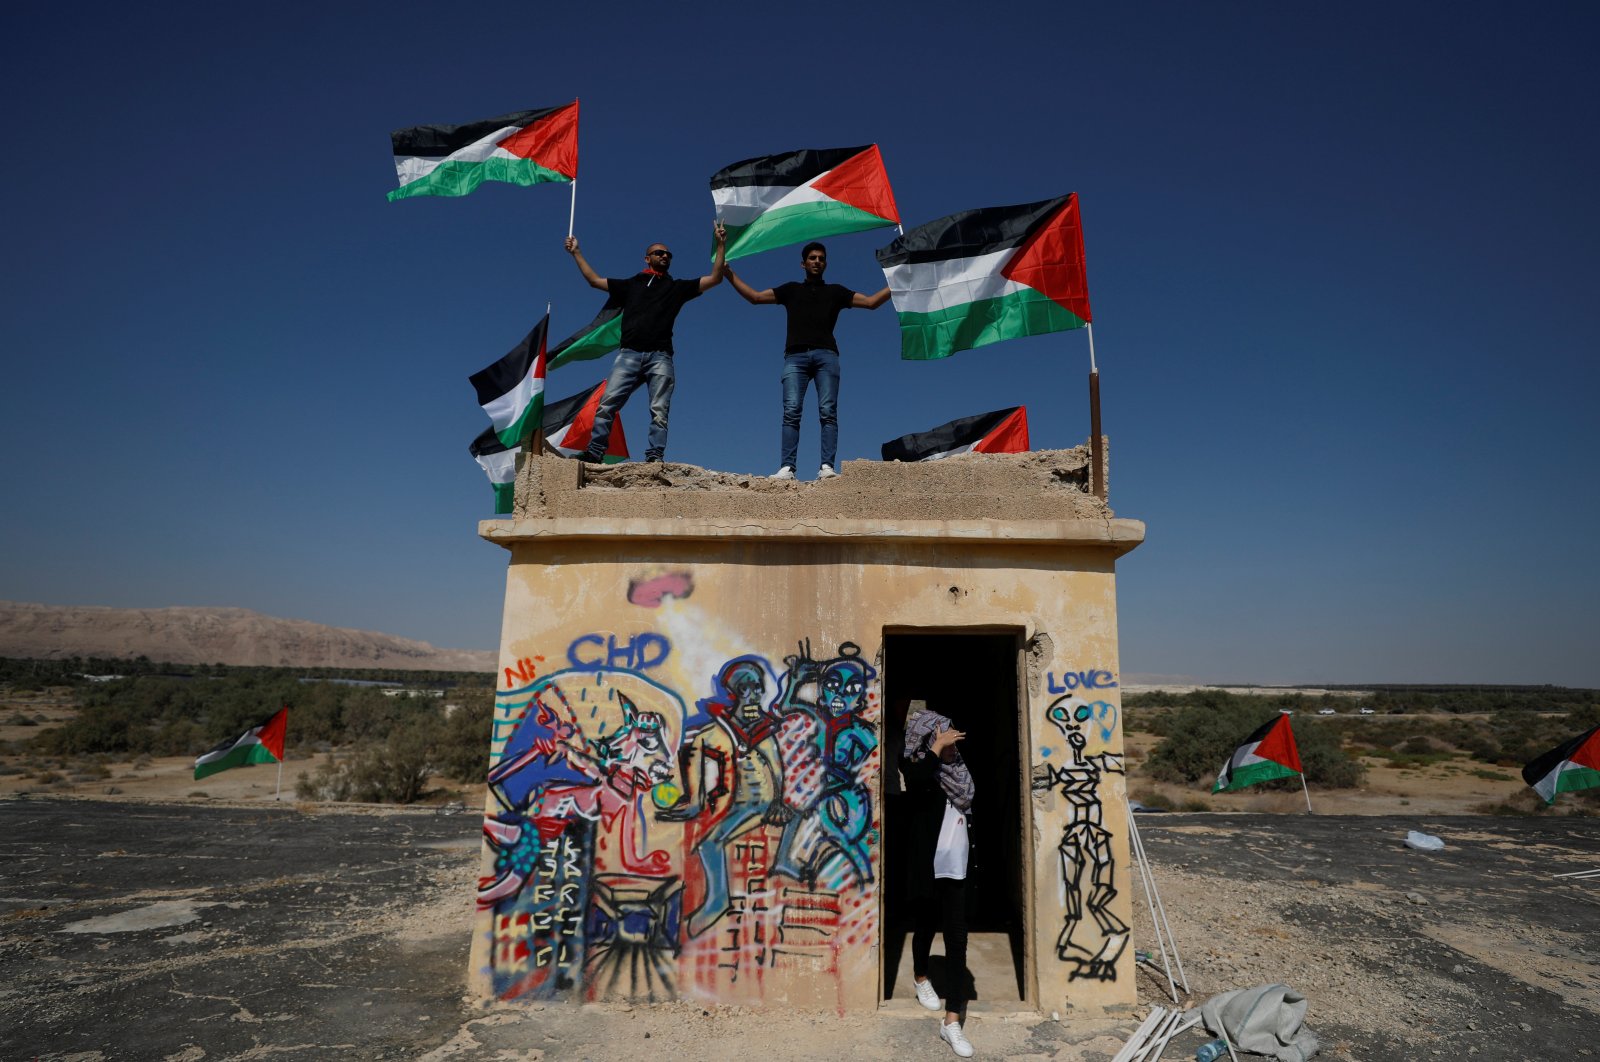 Demonstrators hold Palestinian flags during a protest against illegal settlements near the Dead Sea in the Israeli-occupied West Bank, Sept. 28, 2019. (Reuters Photo)